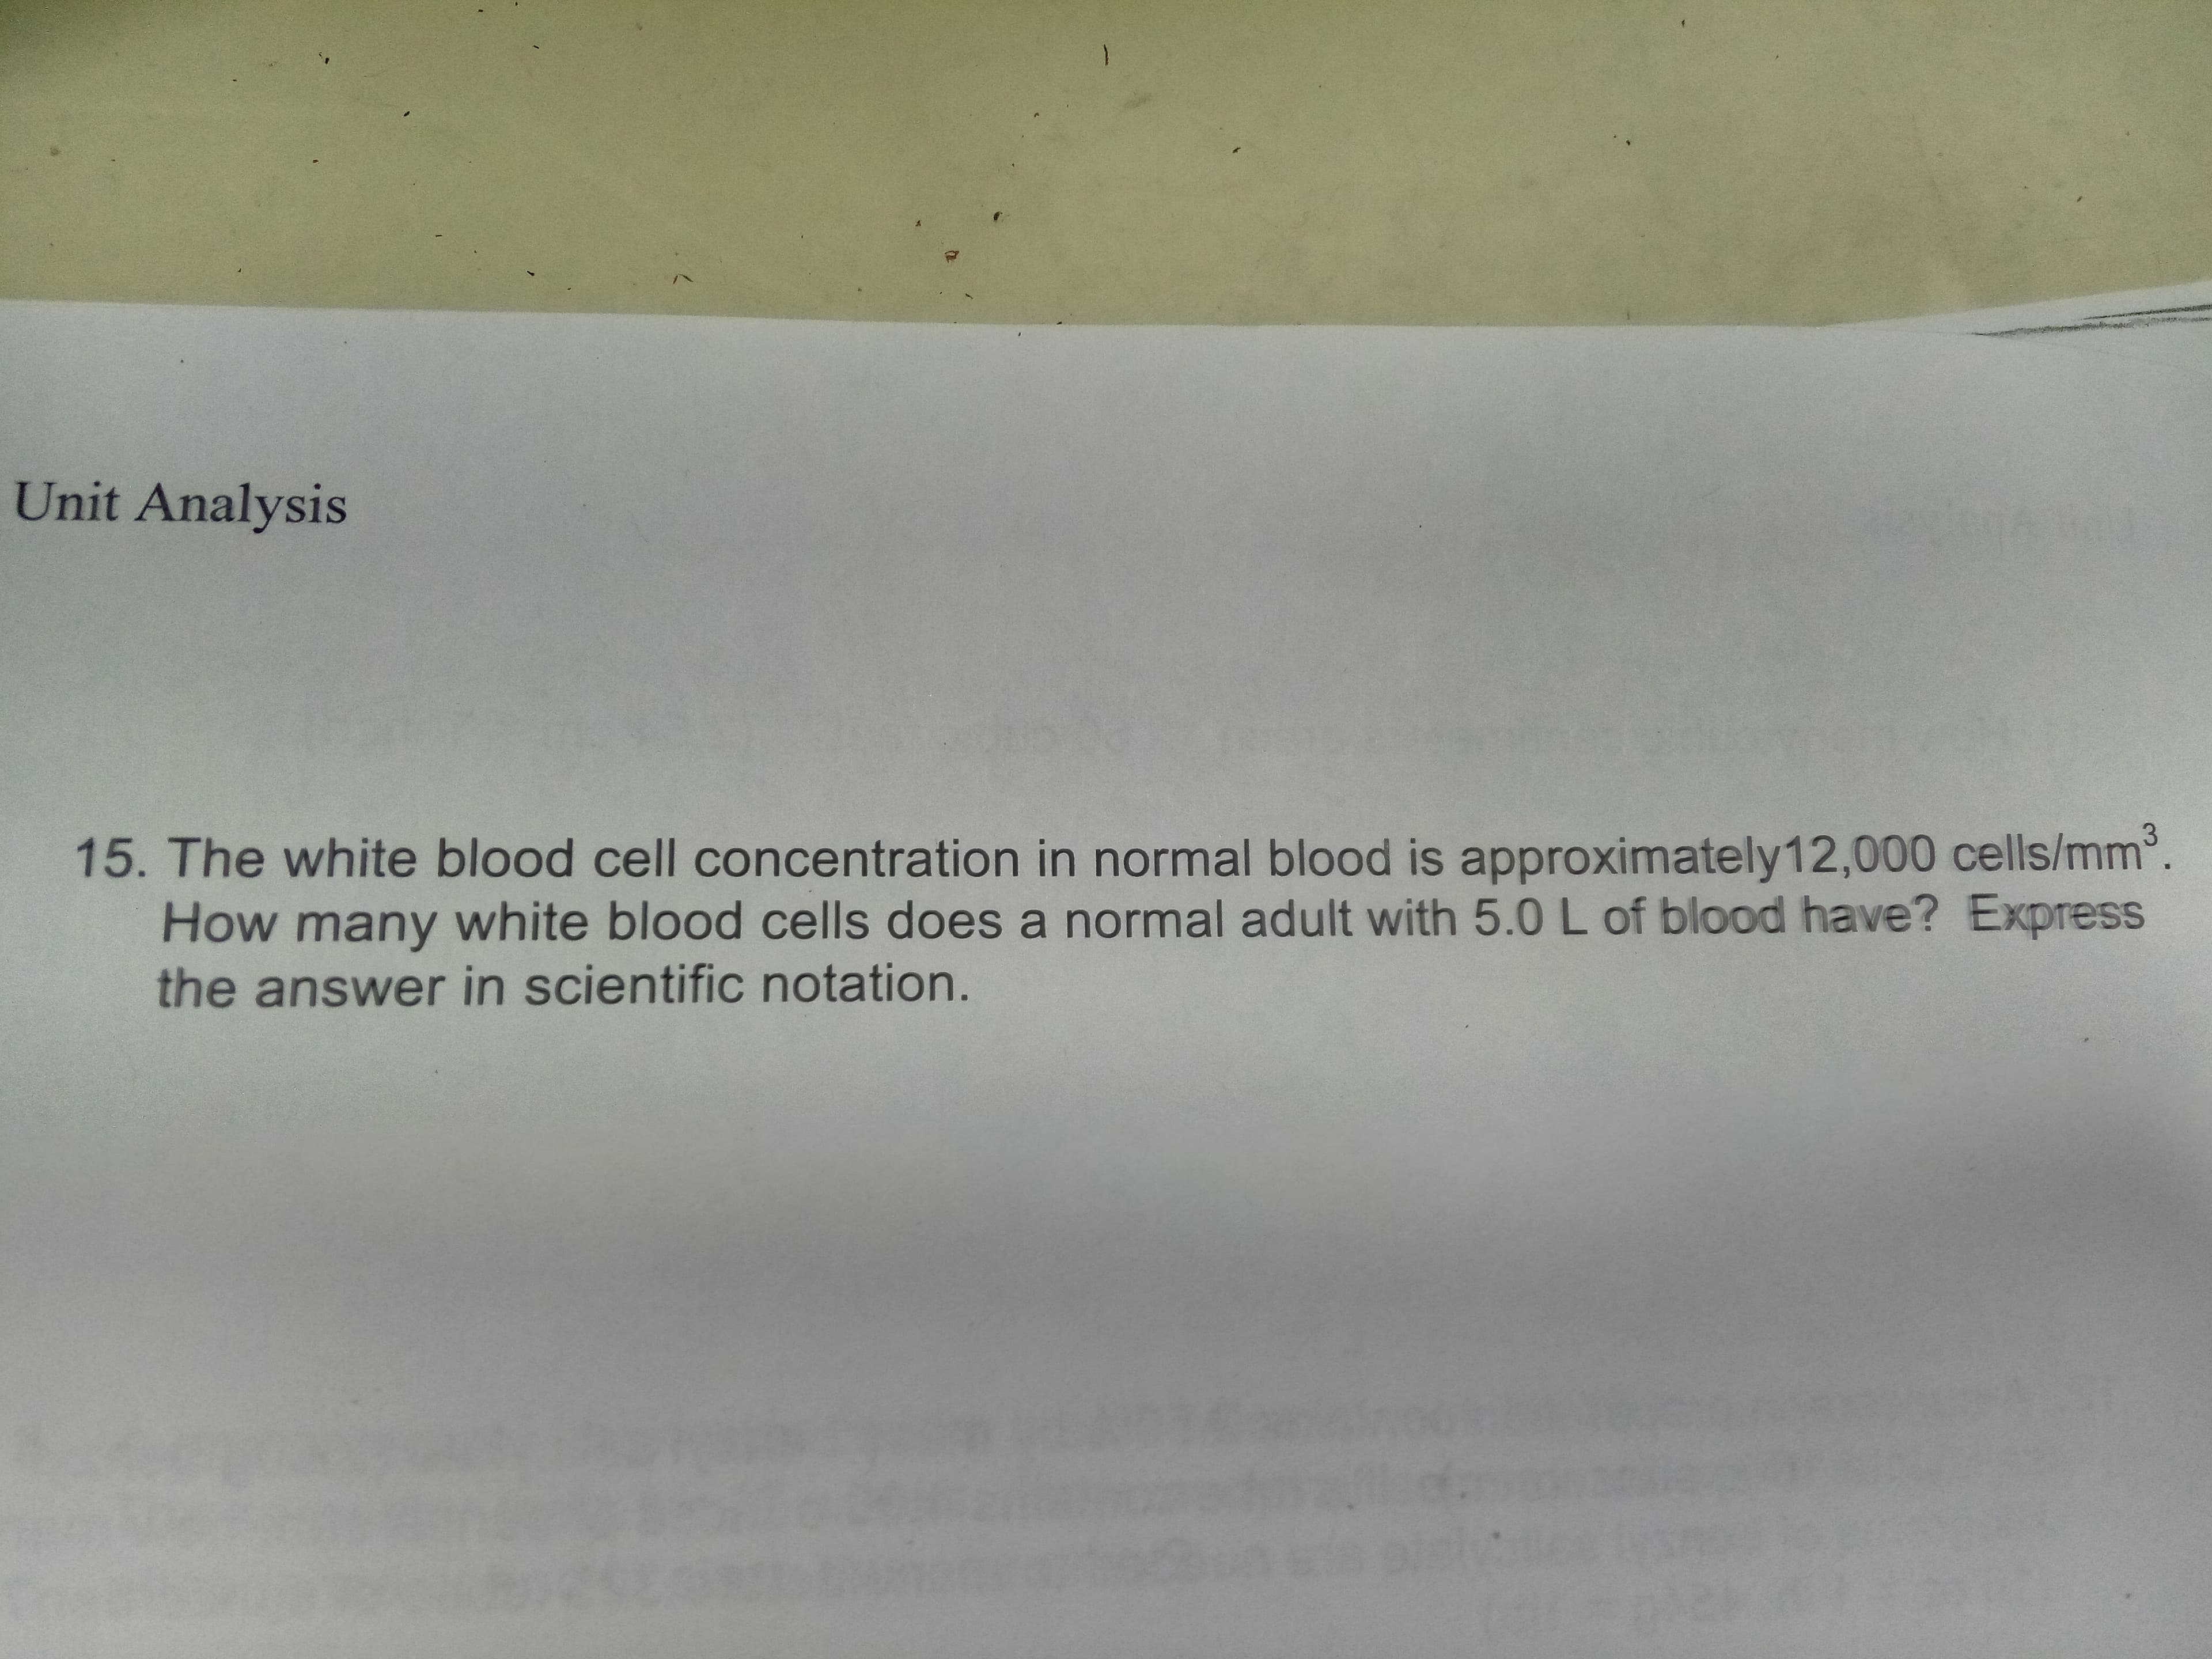 Unit Analysis
15. The white blood cell concentration in normal blood is approximately12,000 cells/mm2.
How many white blood cells does a normal adult with 5.0 L of blood have? Express
the answer in scientific notation.
